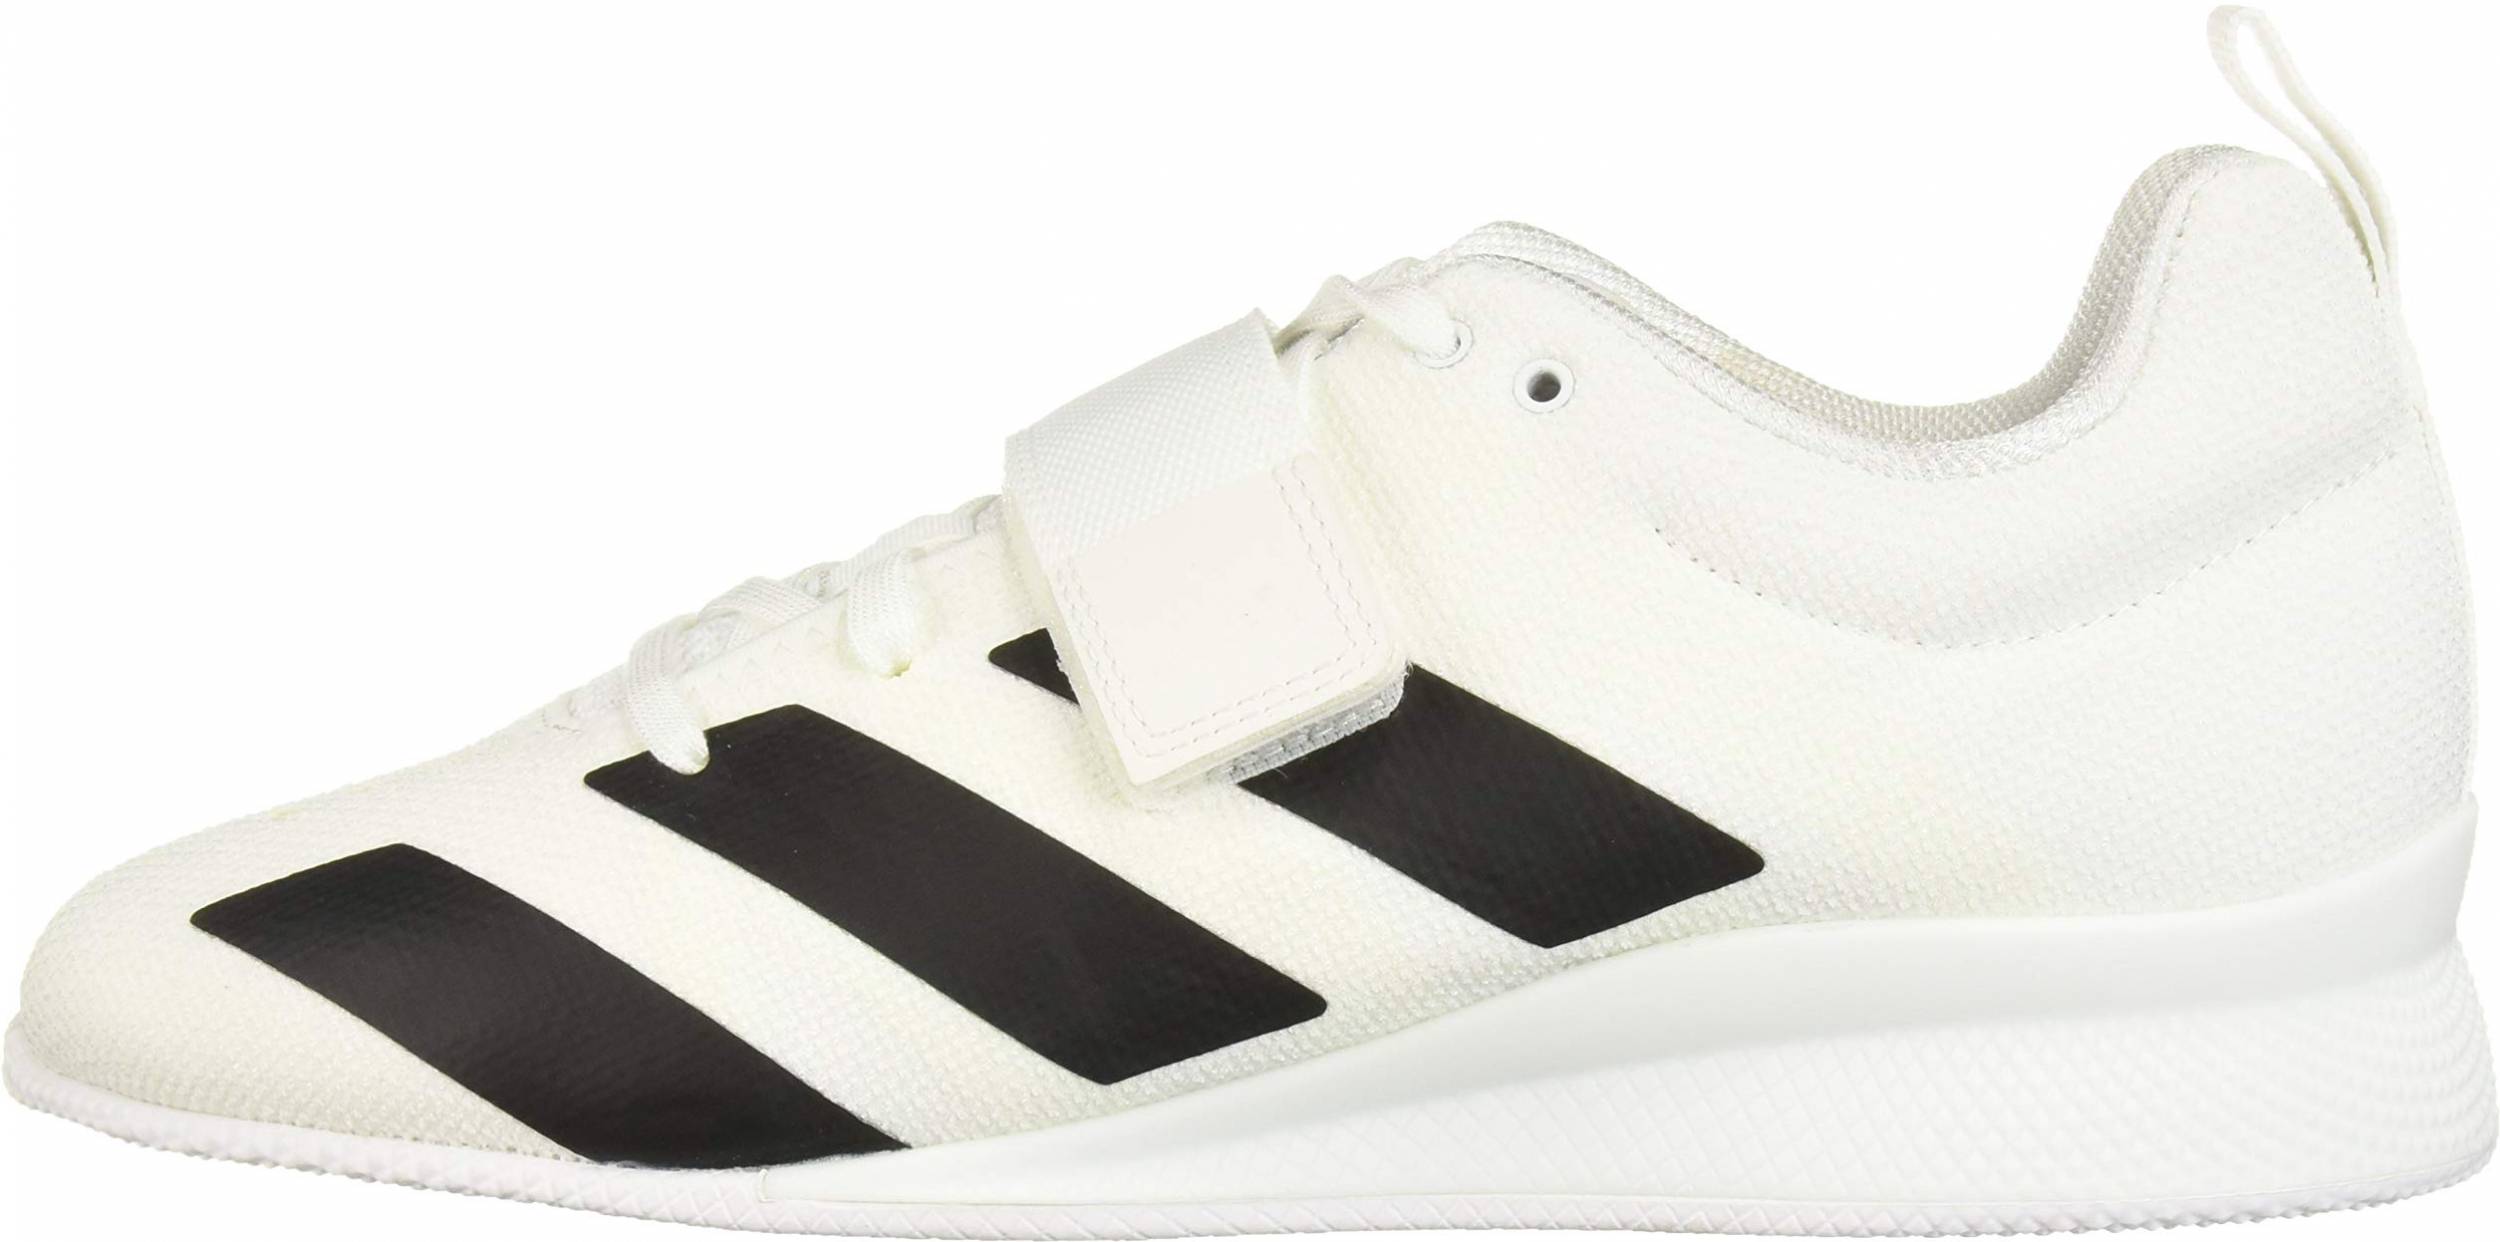 Save 52% on Weightlifting Shoes (24 